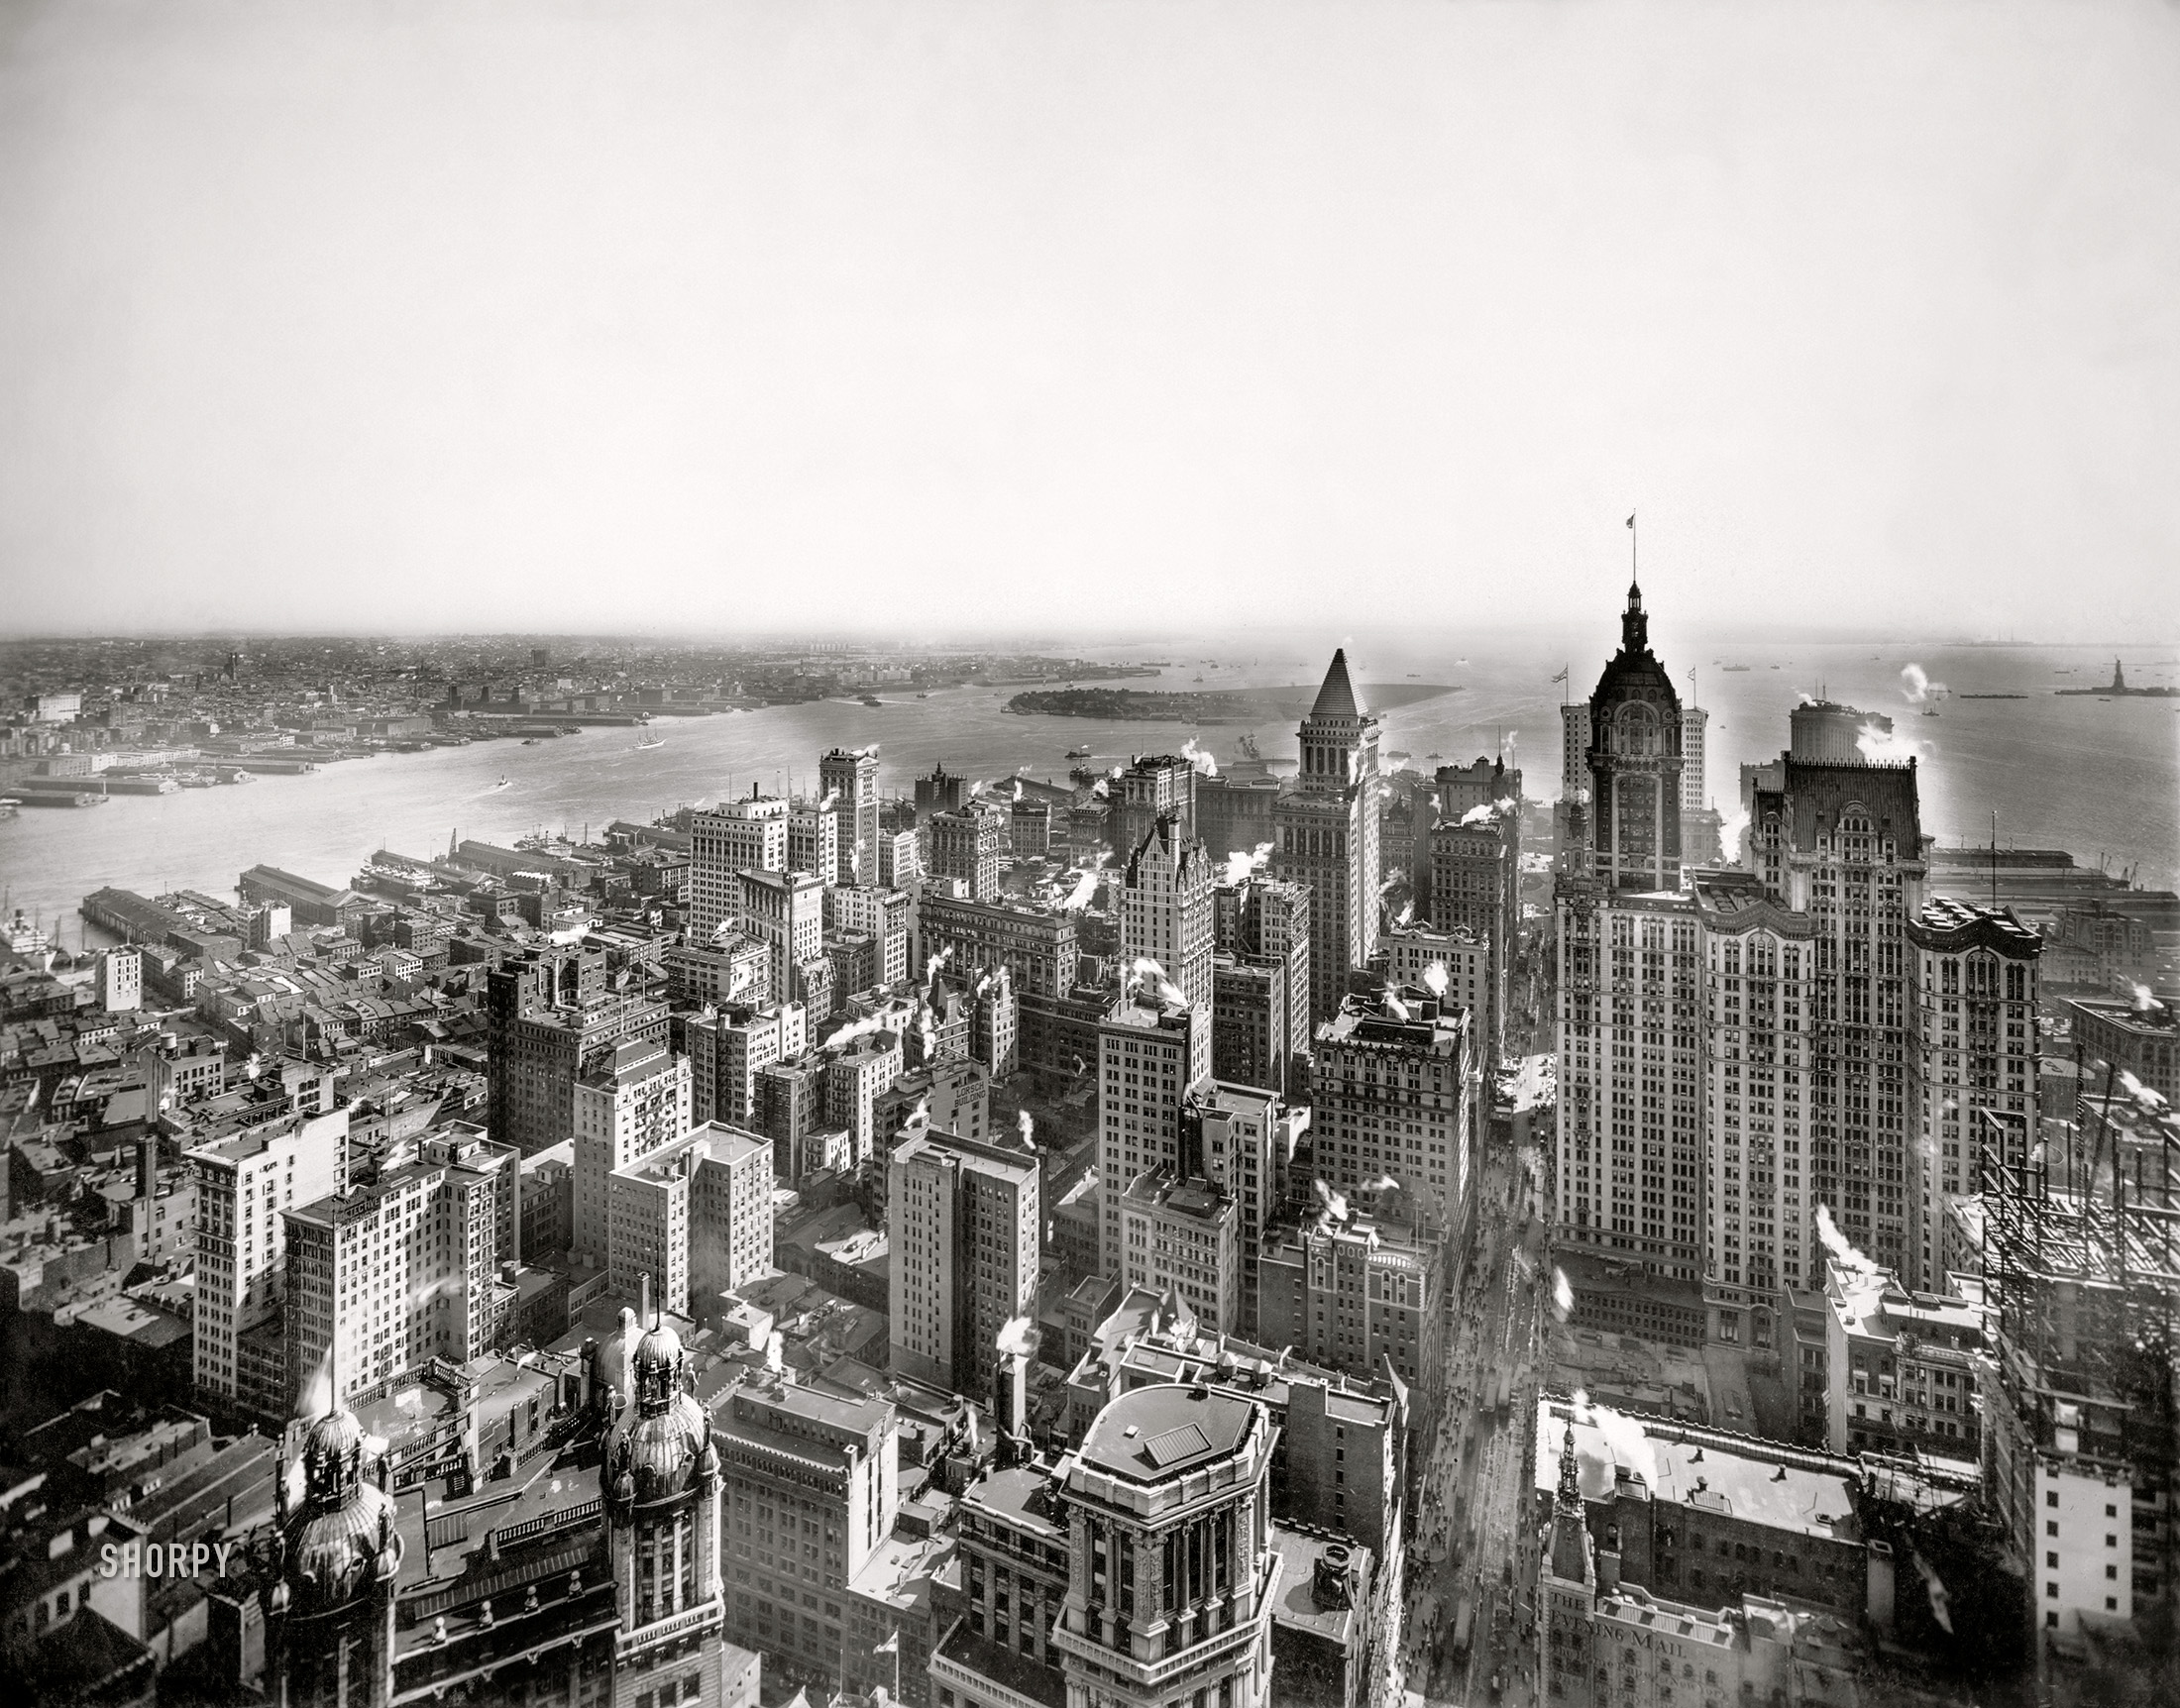 New York, 1913. "Manhattan looking south along Broadway from Woolworth Bldg." Skyscraper landmarks in this bird's eye view include the Singer (tallest) and Park Row (lower left) buildings. At right, the Statue of Liberty. Gelatin silver print by Irving Underhill. View full size.